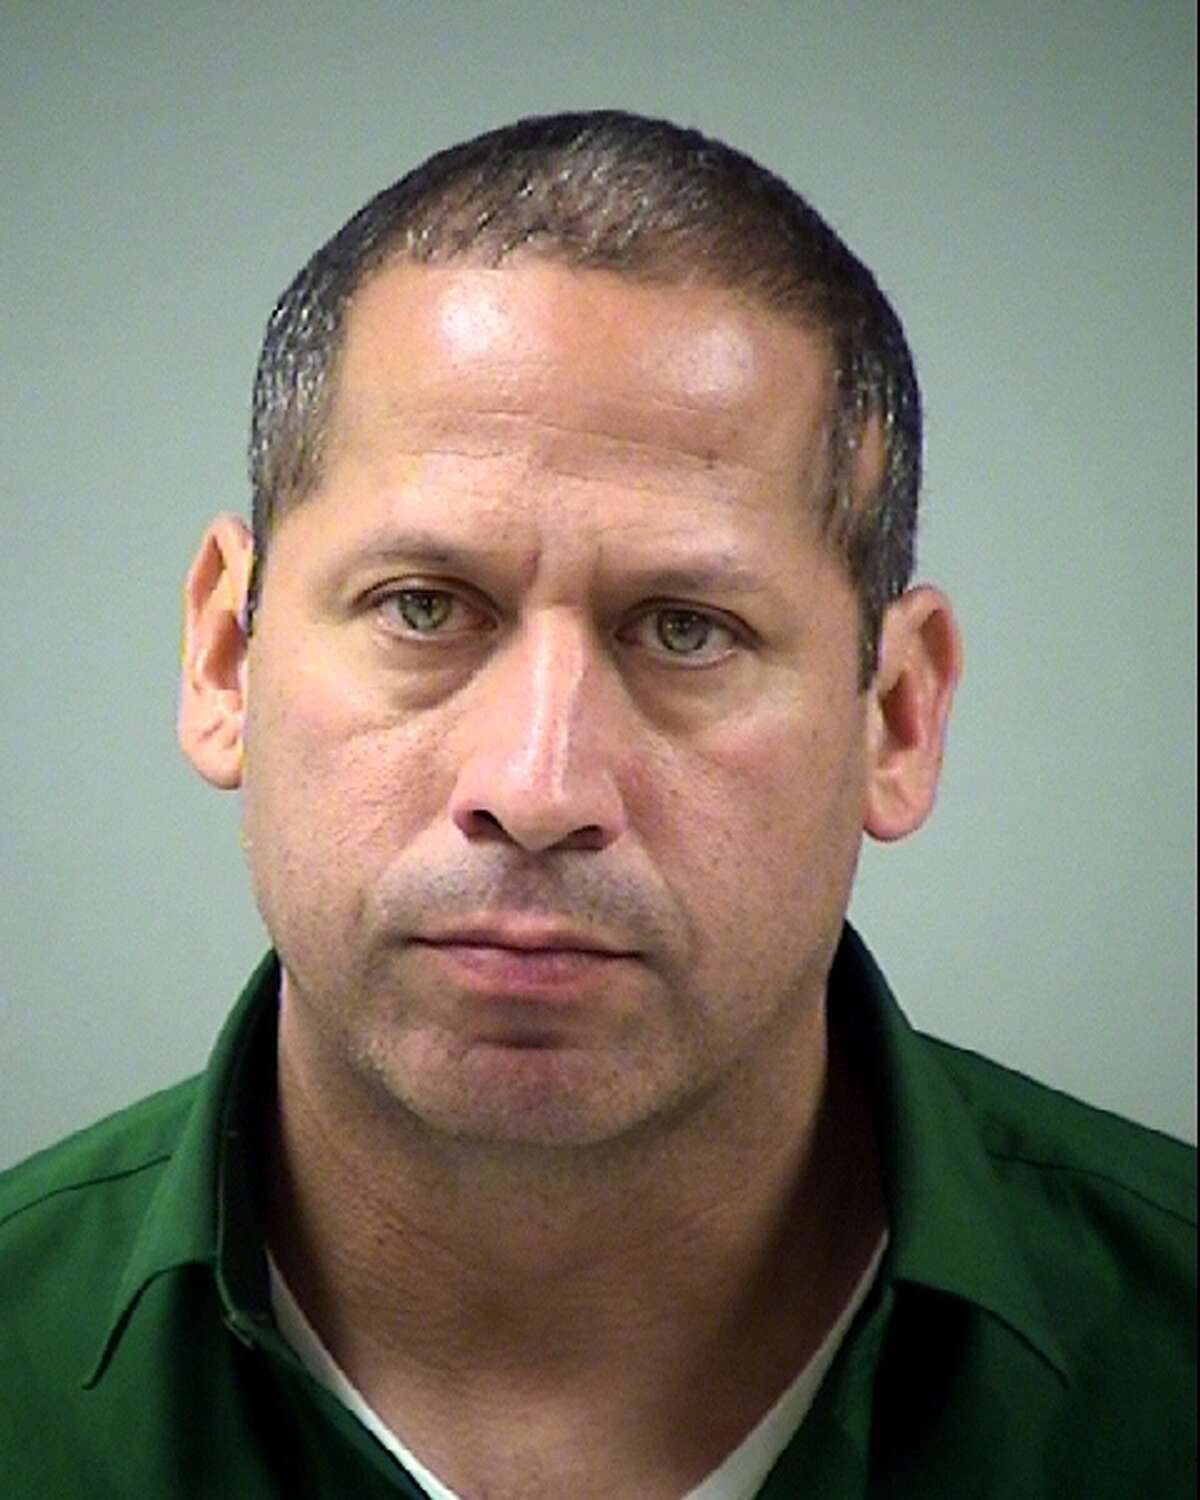 Damien Saenz was among at least four San Antonio Fire Department firefighters arrested for driving while intoxicated in 2014.